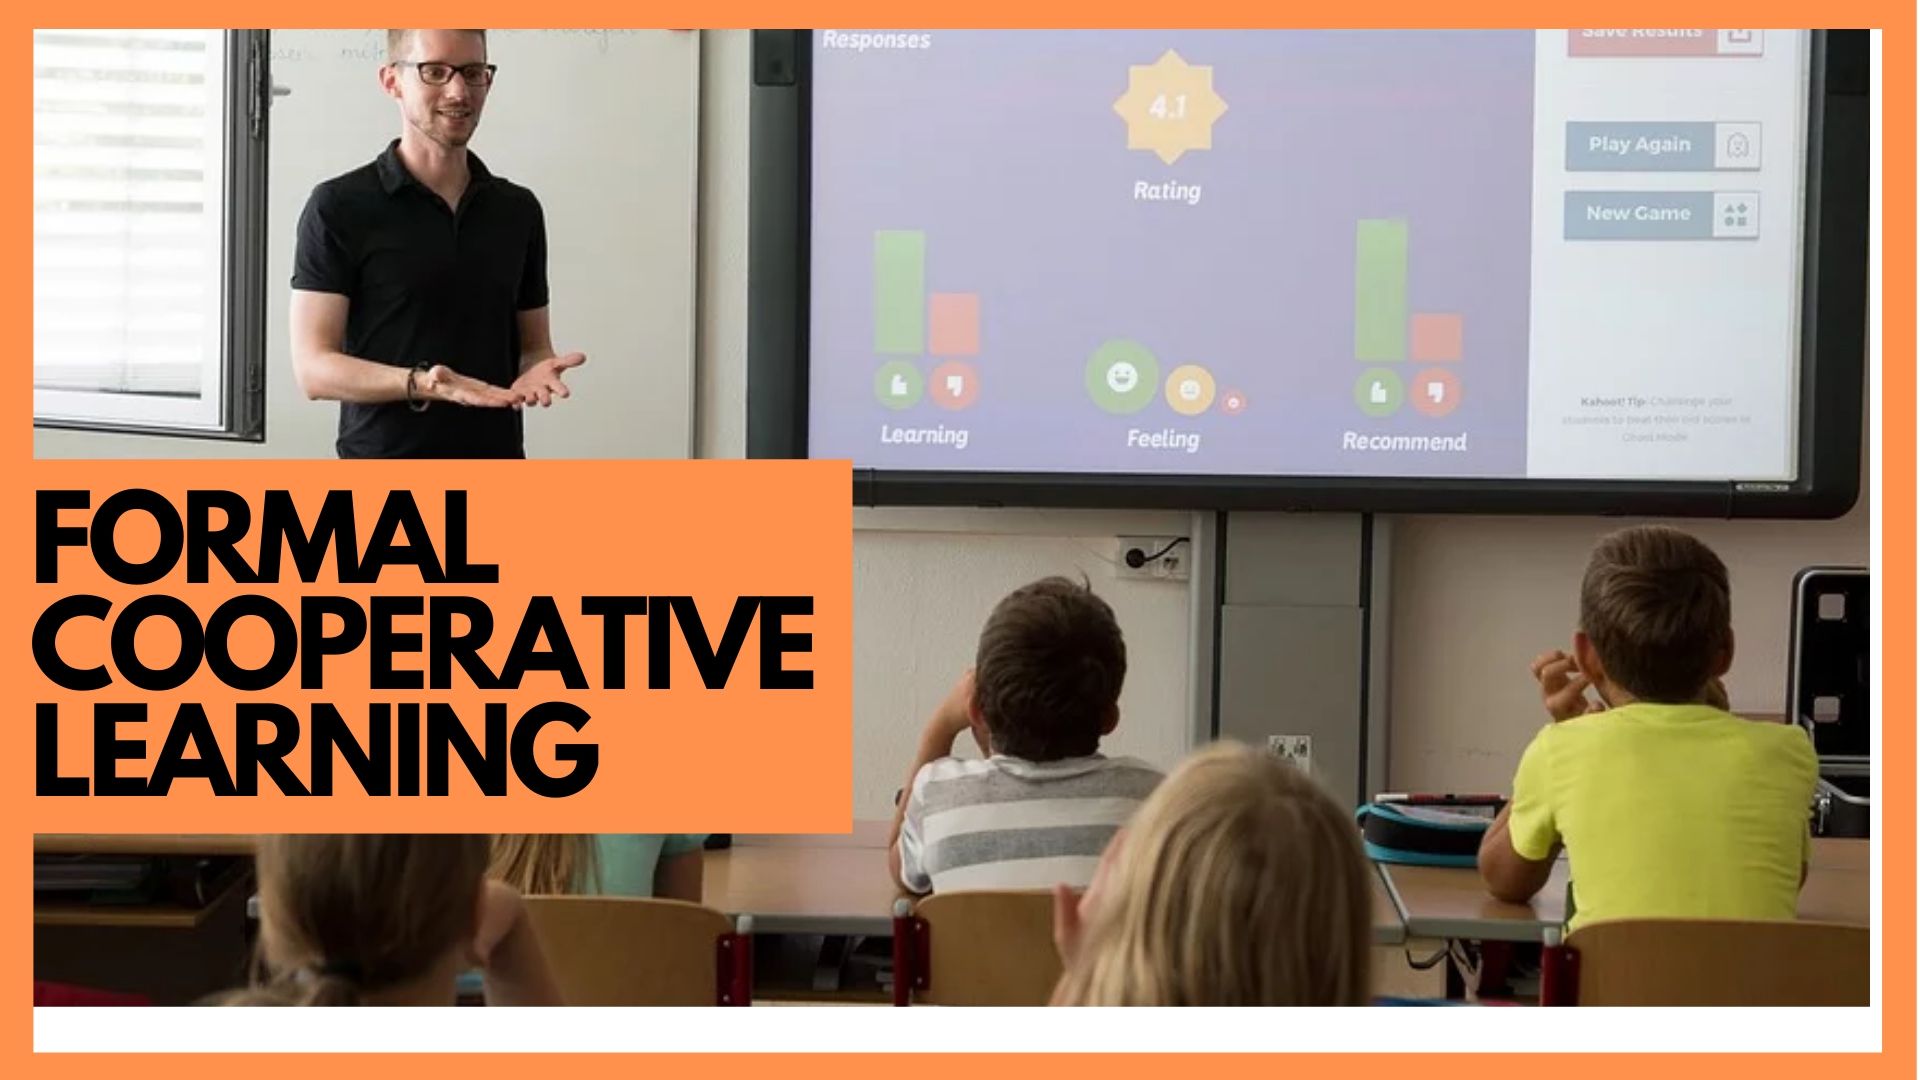 FORMAL COOPERATIVE LEARNING